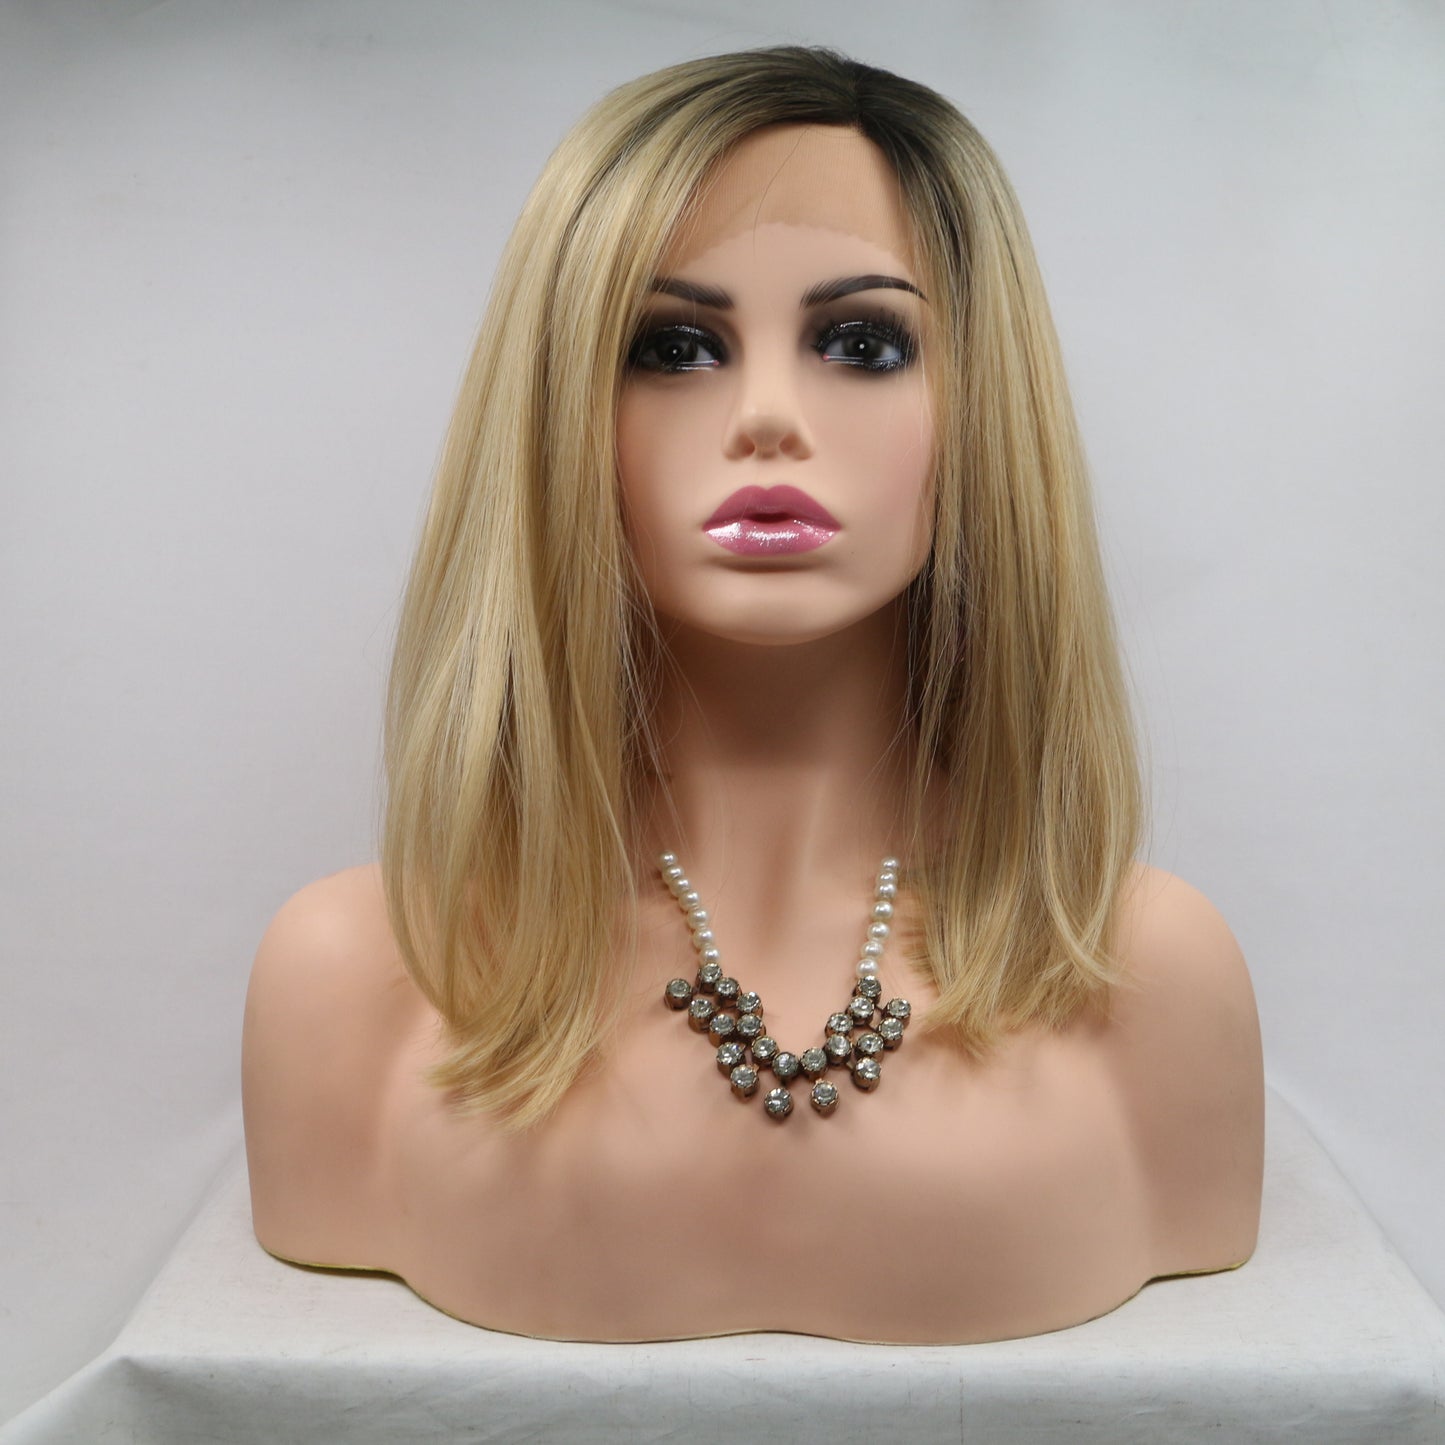 Dark Blonde lace front synthetic hair wig Ash Blonde fashion wig for women Ombre Wig Costume Wig